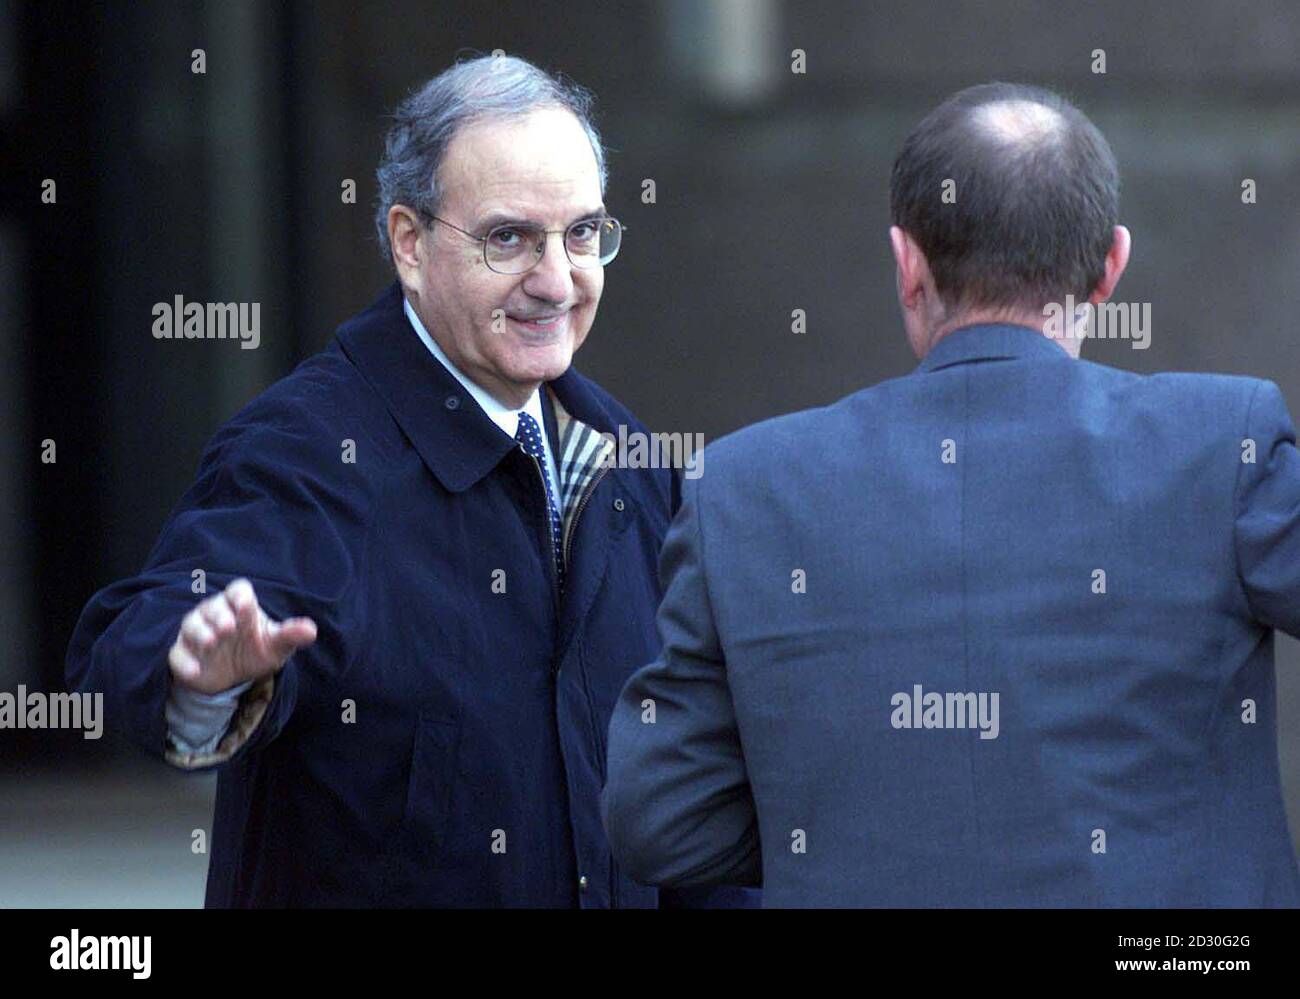 Senator George Mitchell (left) arrrives at Castle Buildings Belfast to continue the search to break the deadlock in the Northern Ireland peace talks. Sinn Fein is believed to be poised to issue a statement deploring  political violence in an effort to break the deadlock.  * ...in the Northern Ireland peace process. At the same time a senior IRA member could be nominated to negotiate over weapons with General John de Chastelain, chairman of the International Decommissioning Commission.   Stock Photo